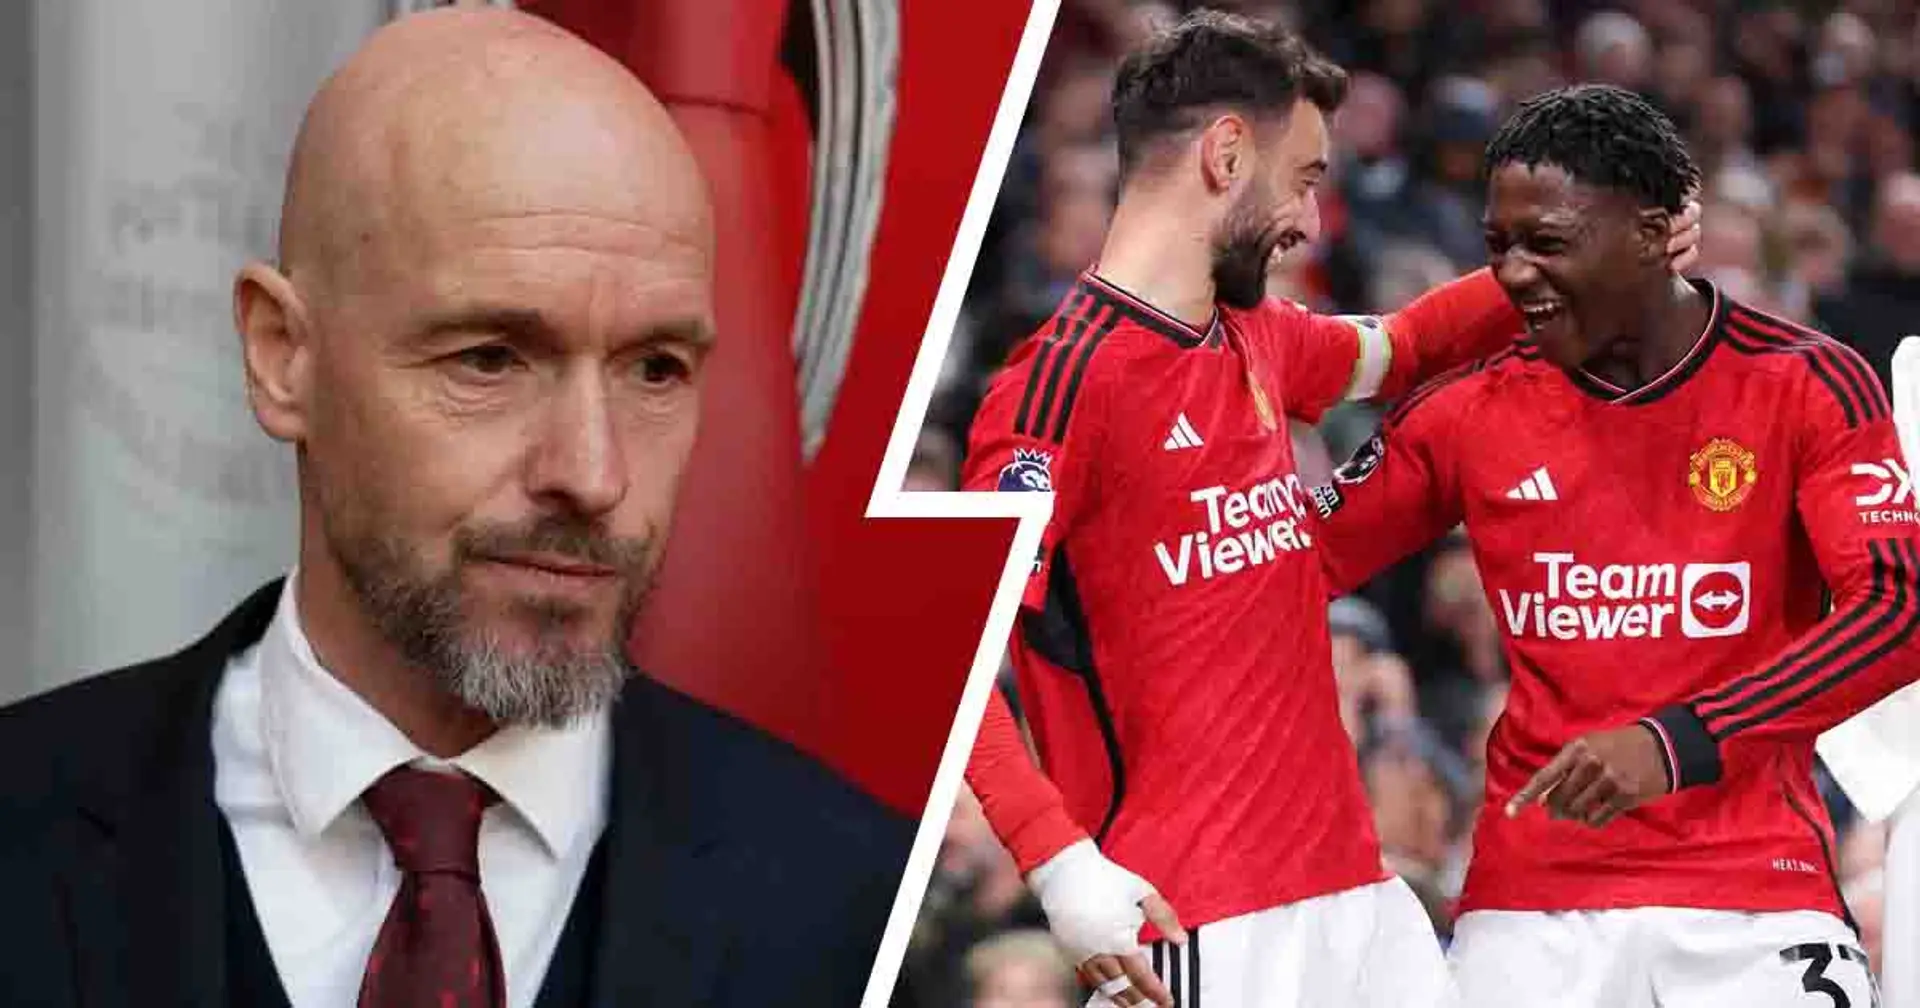 Erik ten Hag names Man United's ultimate end-of-season objective after thrilling Sheffield win